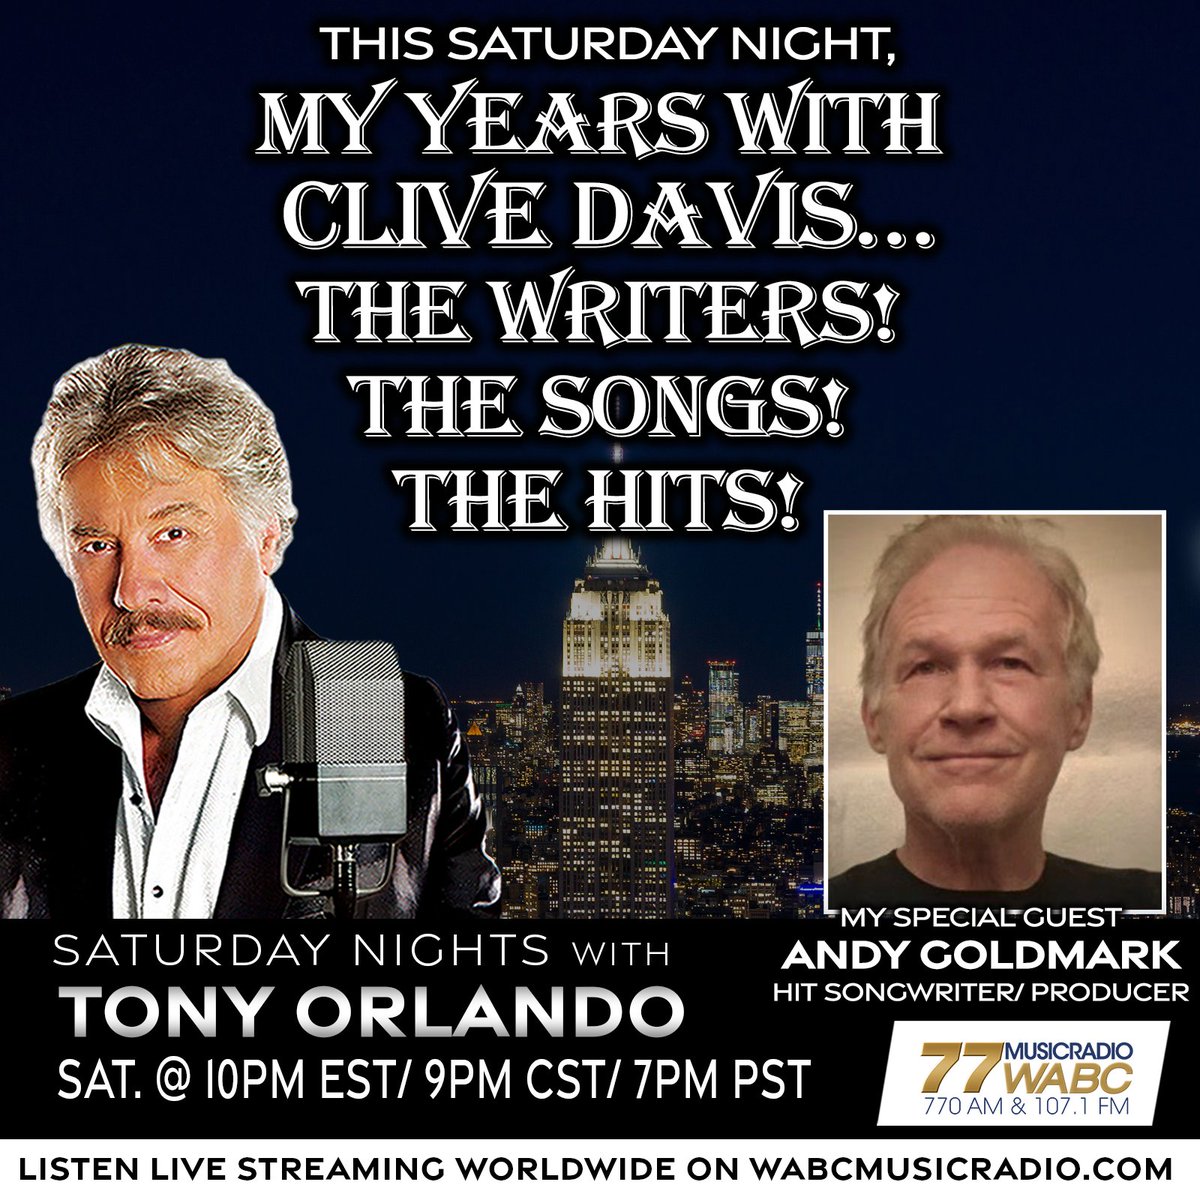 TONIGHT at 10PM: My Years With Clive Davis… The Writers! The Songs! The Hits! Host @TonyOrlando will have guest Andy Goldmark on the show! Join us TONIGHT from 10PM-midnight on wabcmusicradio.com, 770 AM, or on the 77 WABC app! #77WABCRadio #Music #TonyOrlando